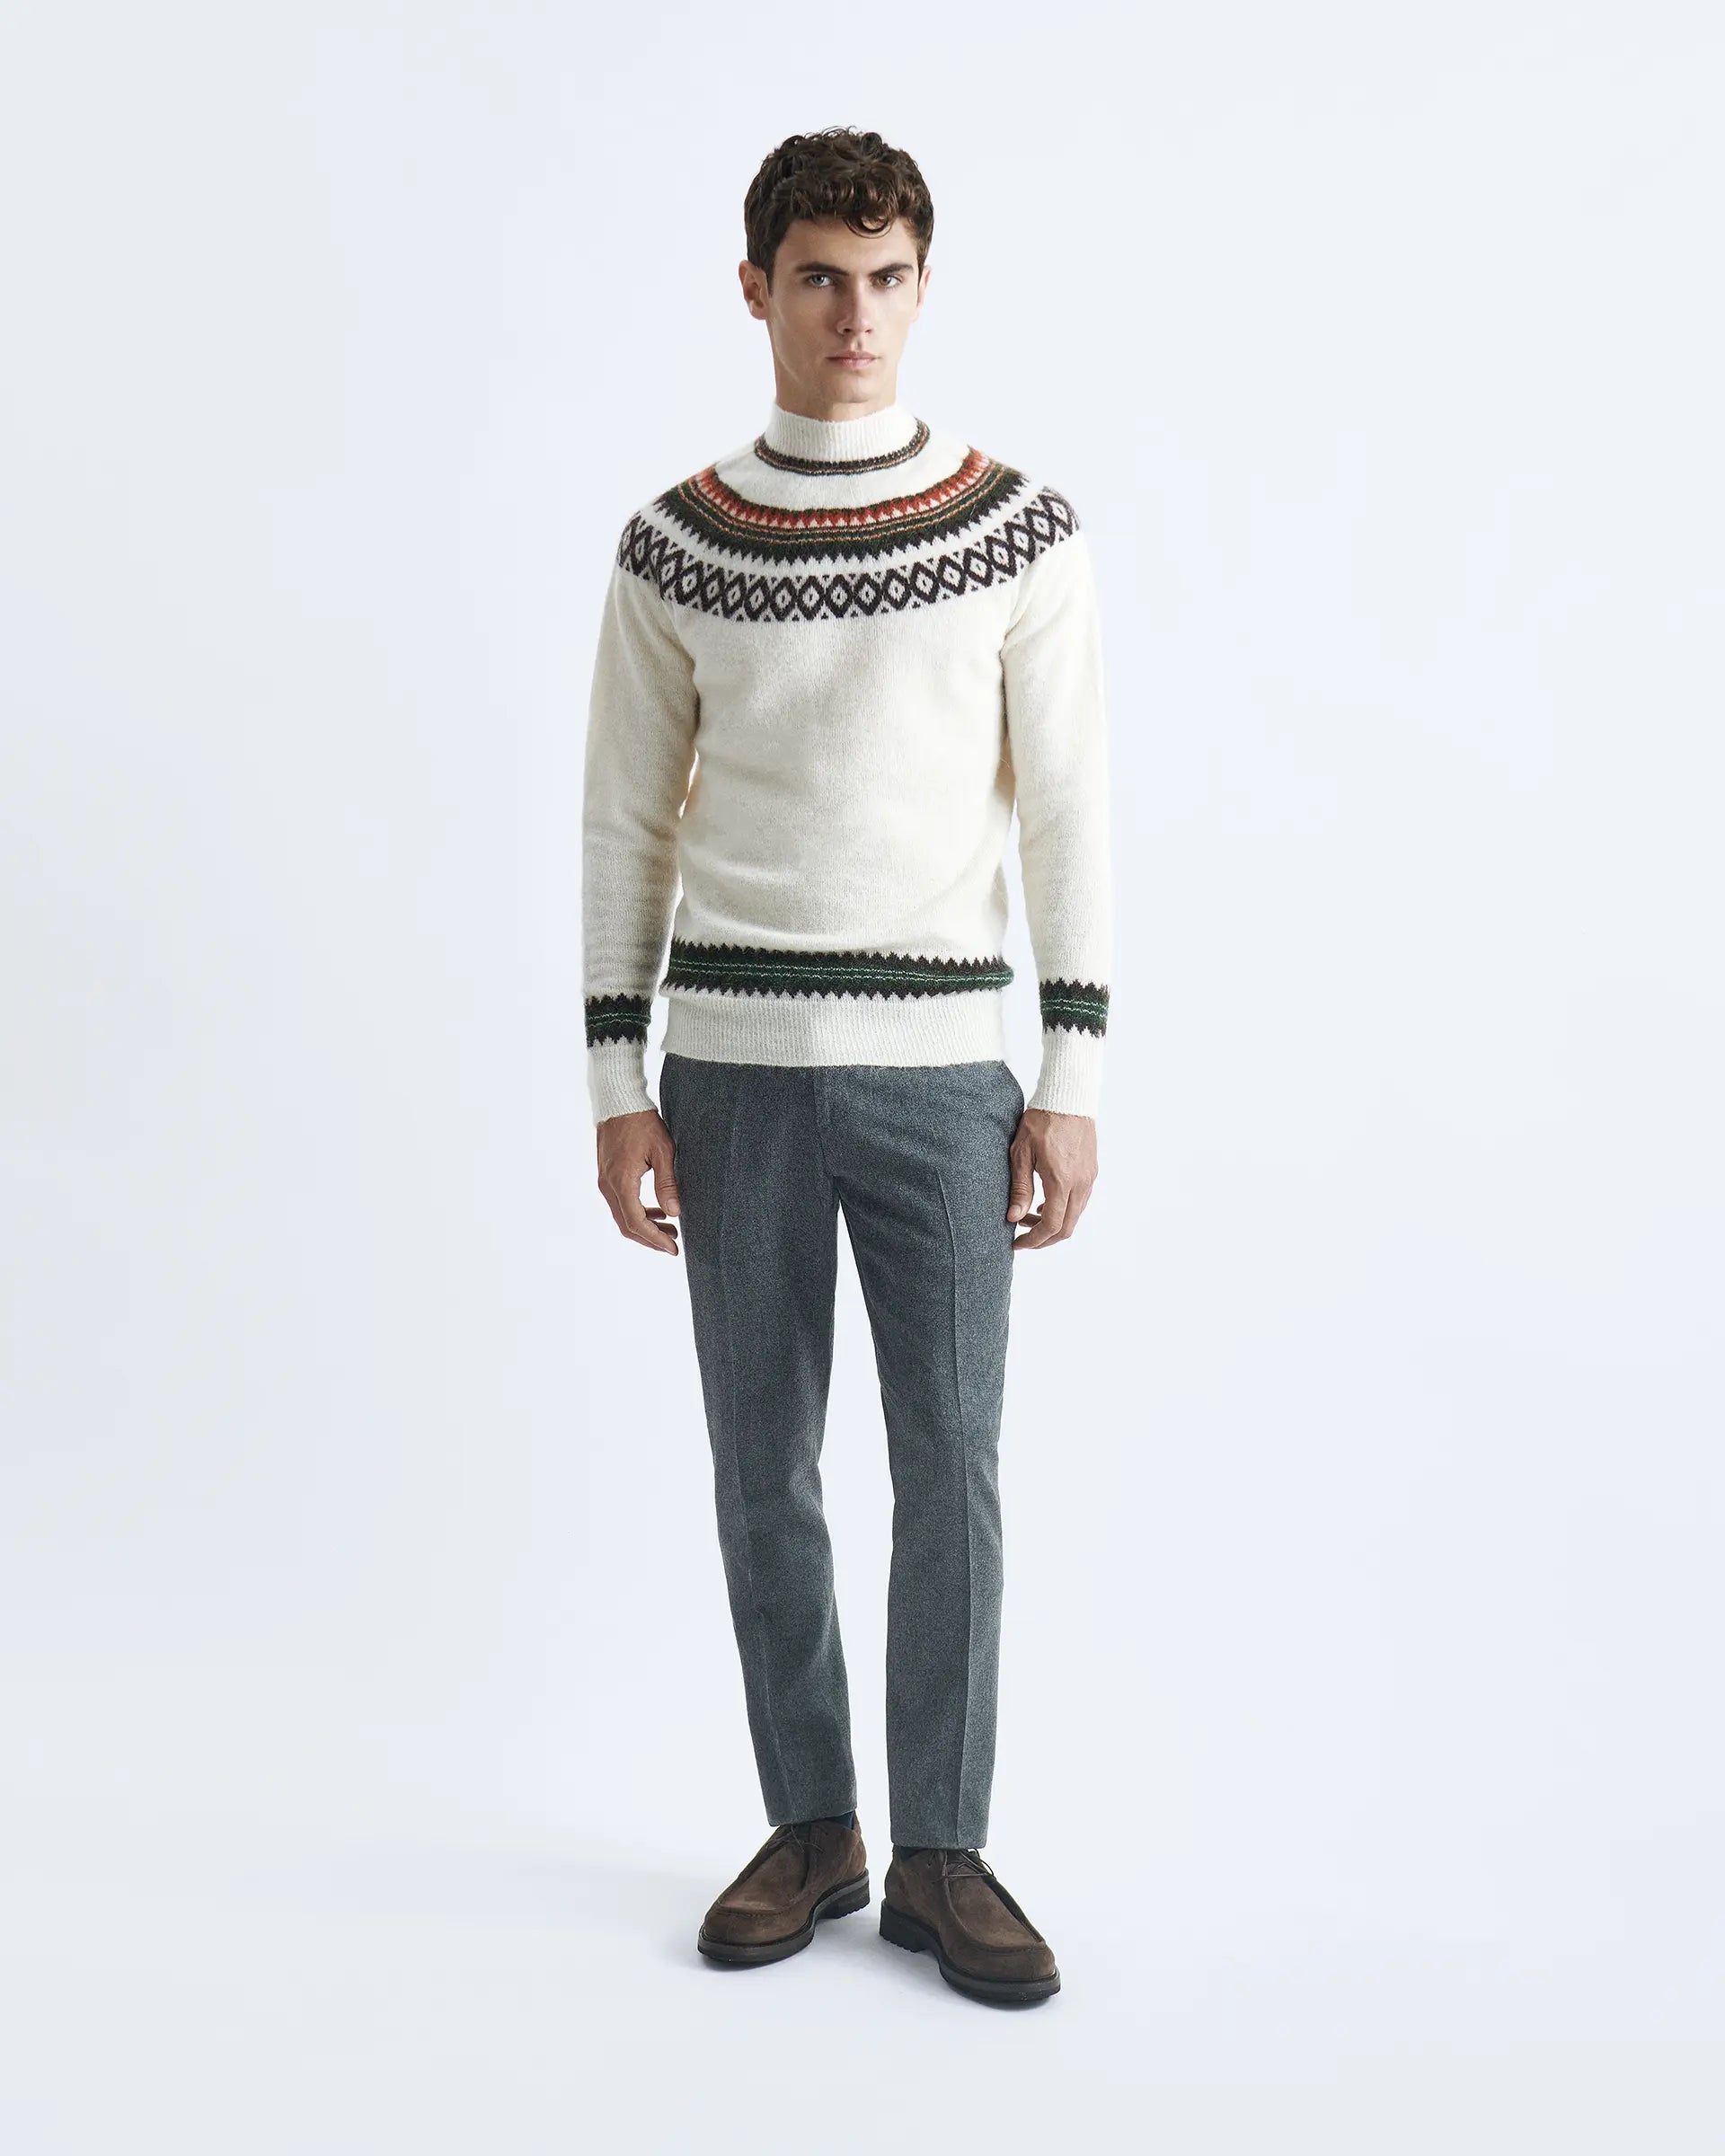 White patterned crewneck in 7 gauge wool and mohair